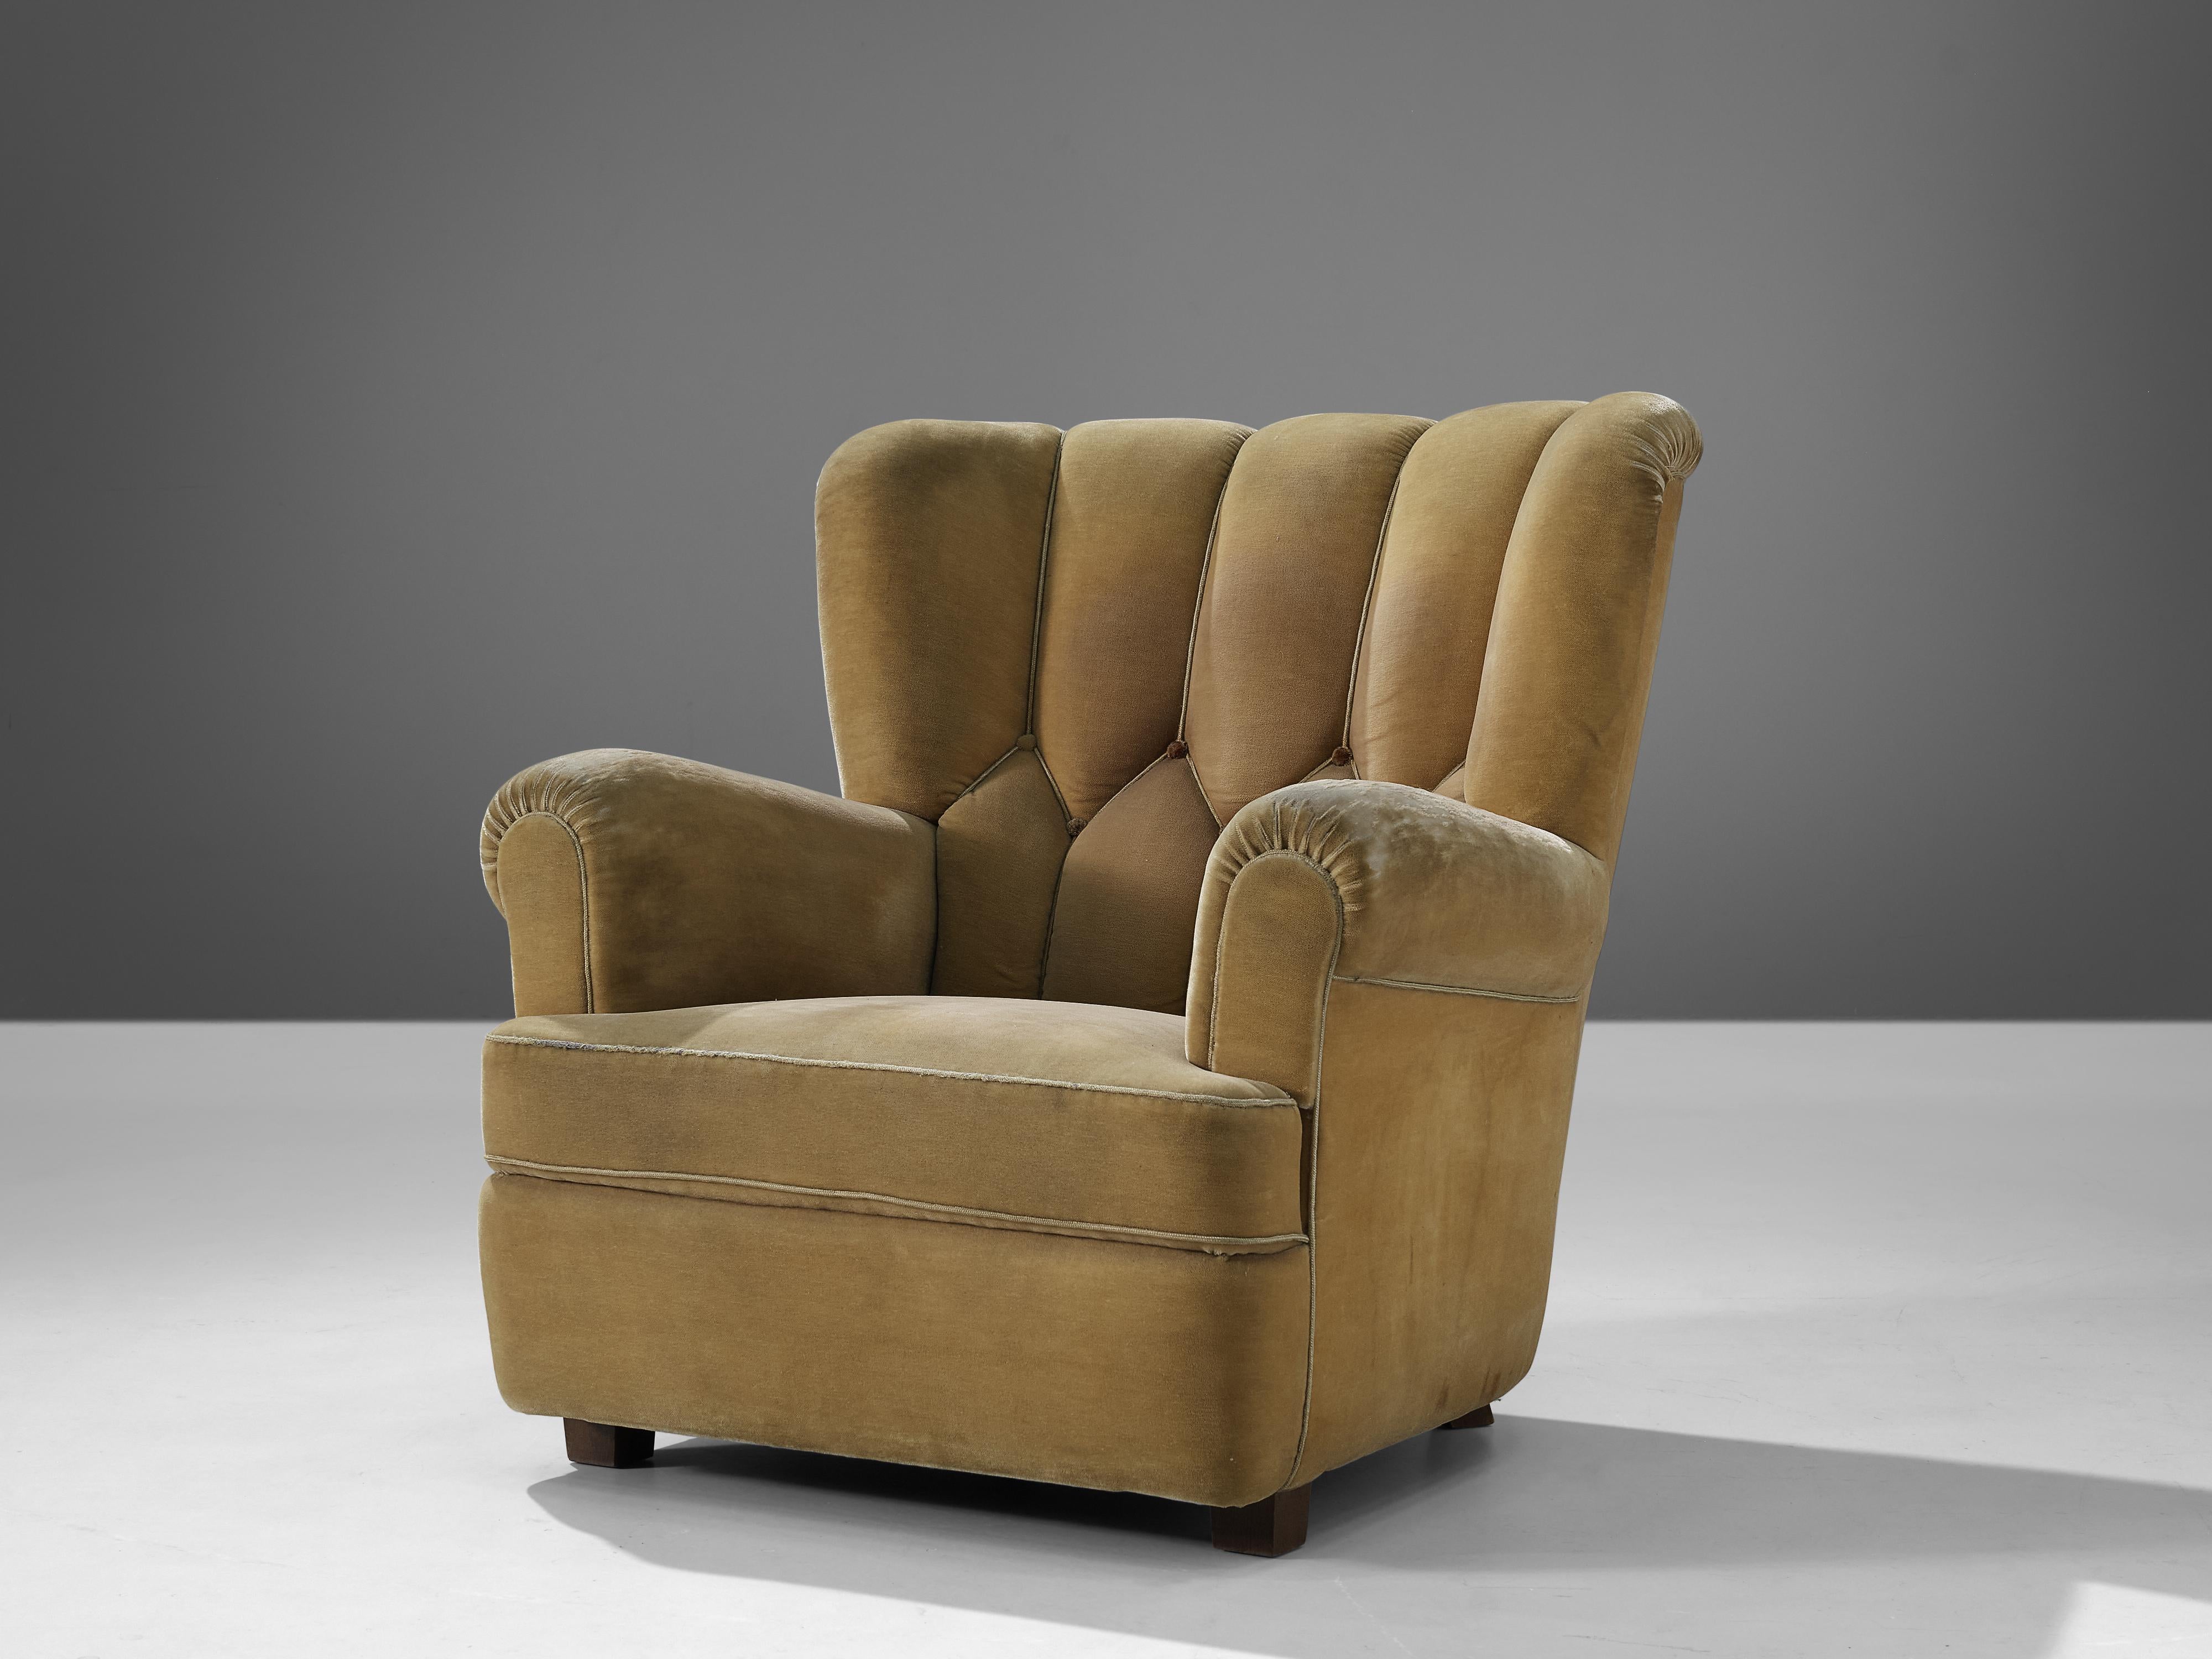 Danish lounge chair, wood, fabric, Denmark, 1950s

This bulky lounge chair features a sturdy yet inviting look. The wide seat with armrests and the backrest with wings, create a comfortable experience for the sitter. From the back, the chair has a